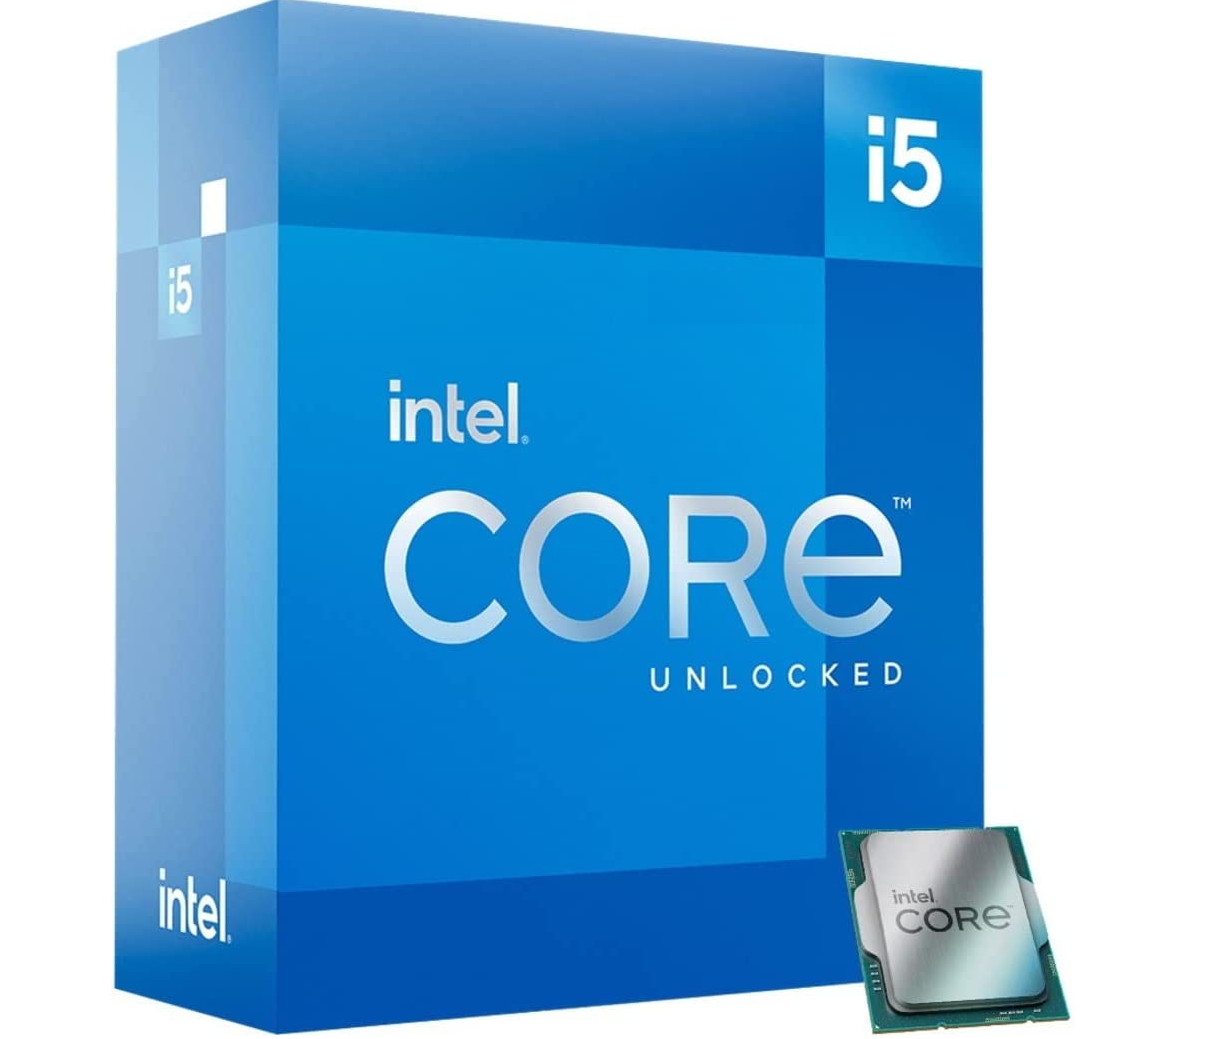 Intel Core i5-13600K trades blows with the Core i9-12900K on Geekbench -   News